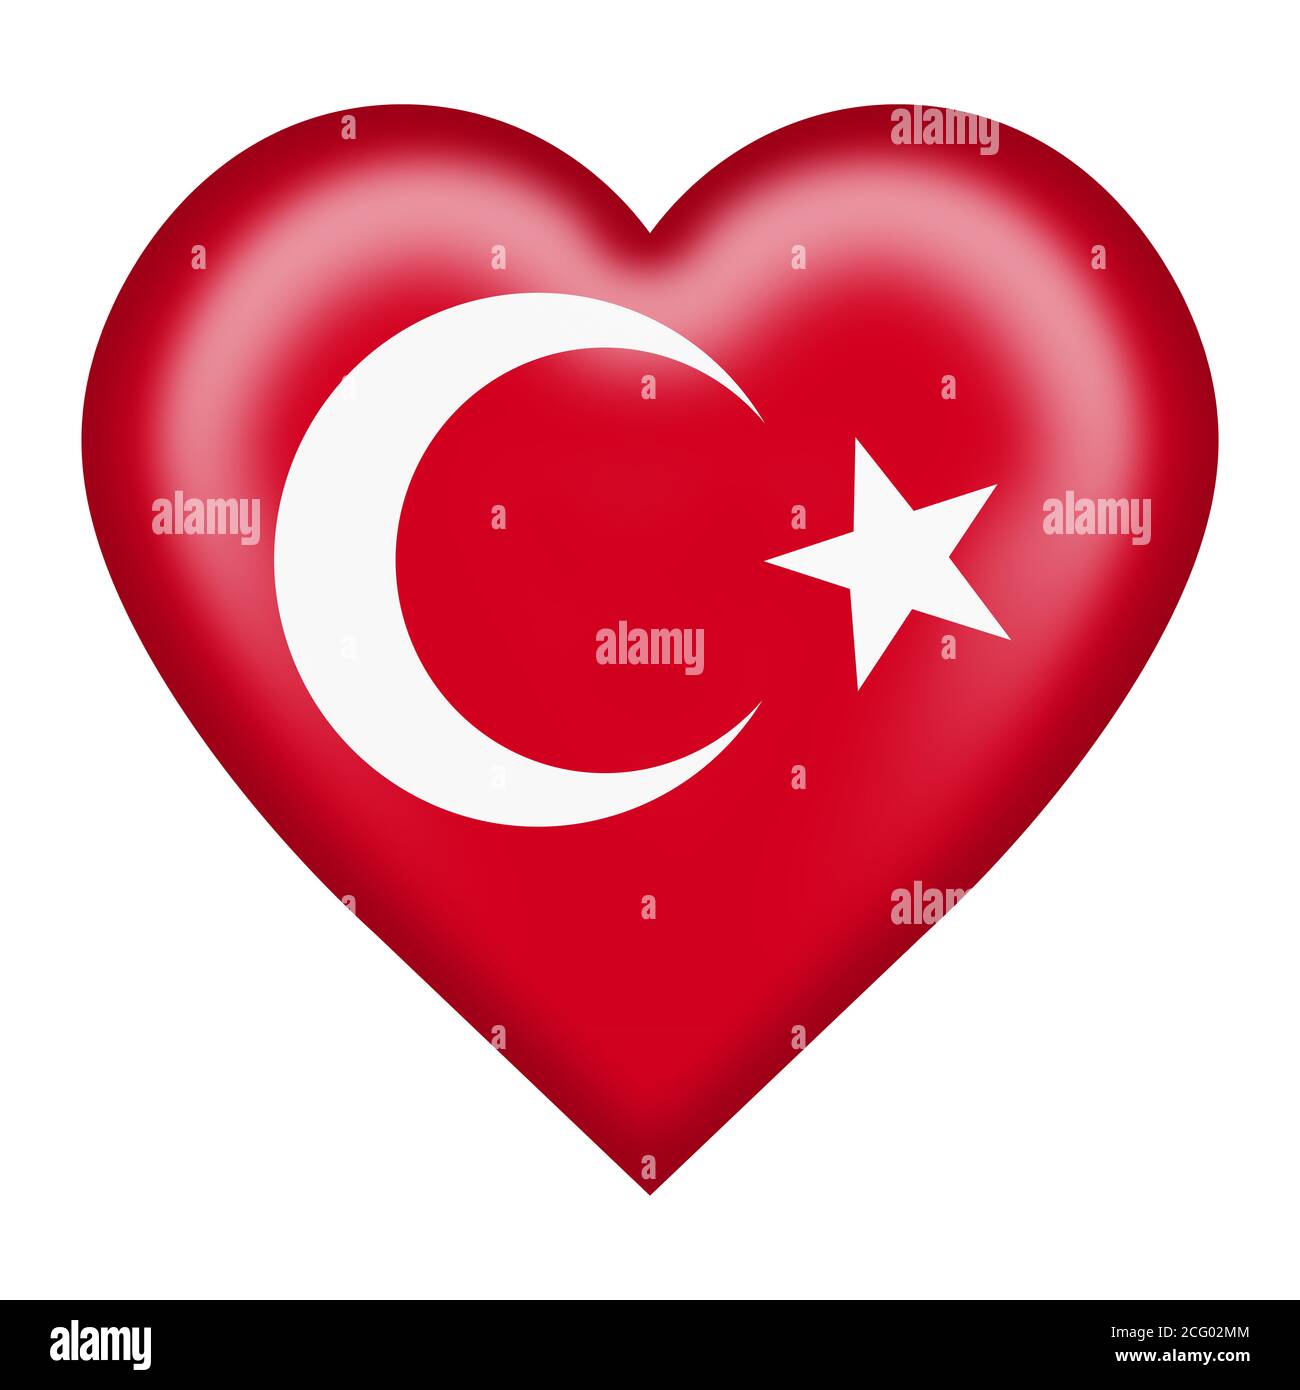 Turkey flag heart button red crescent moon star 3d illustration isolated on white with clipping path Stock Photo